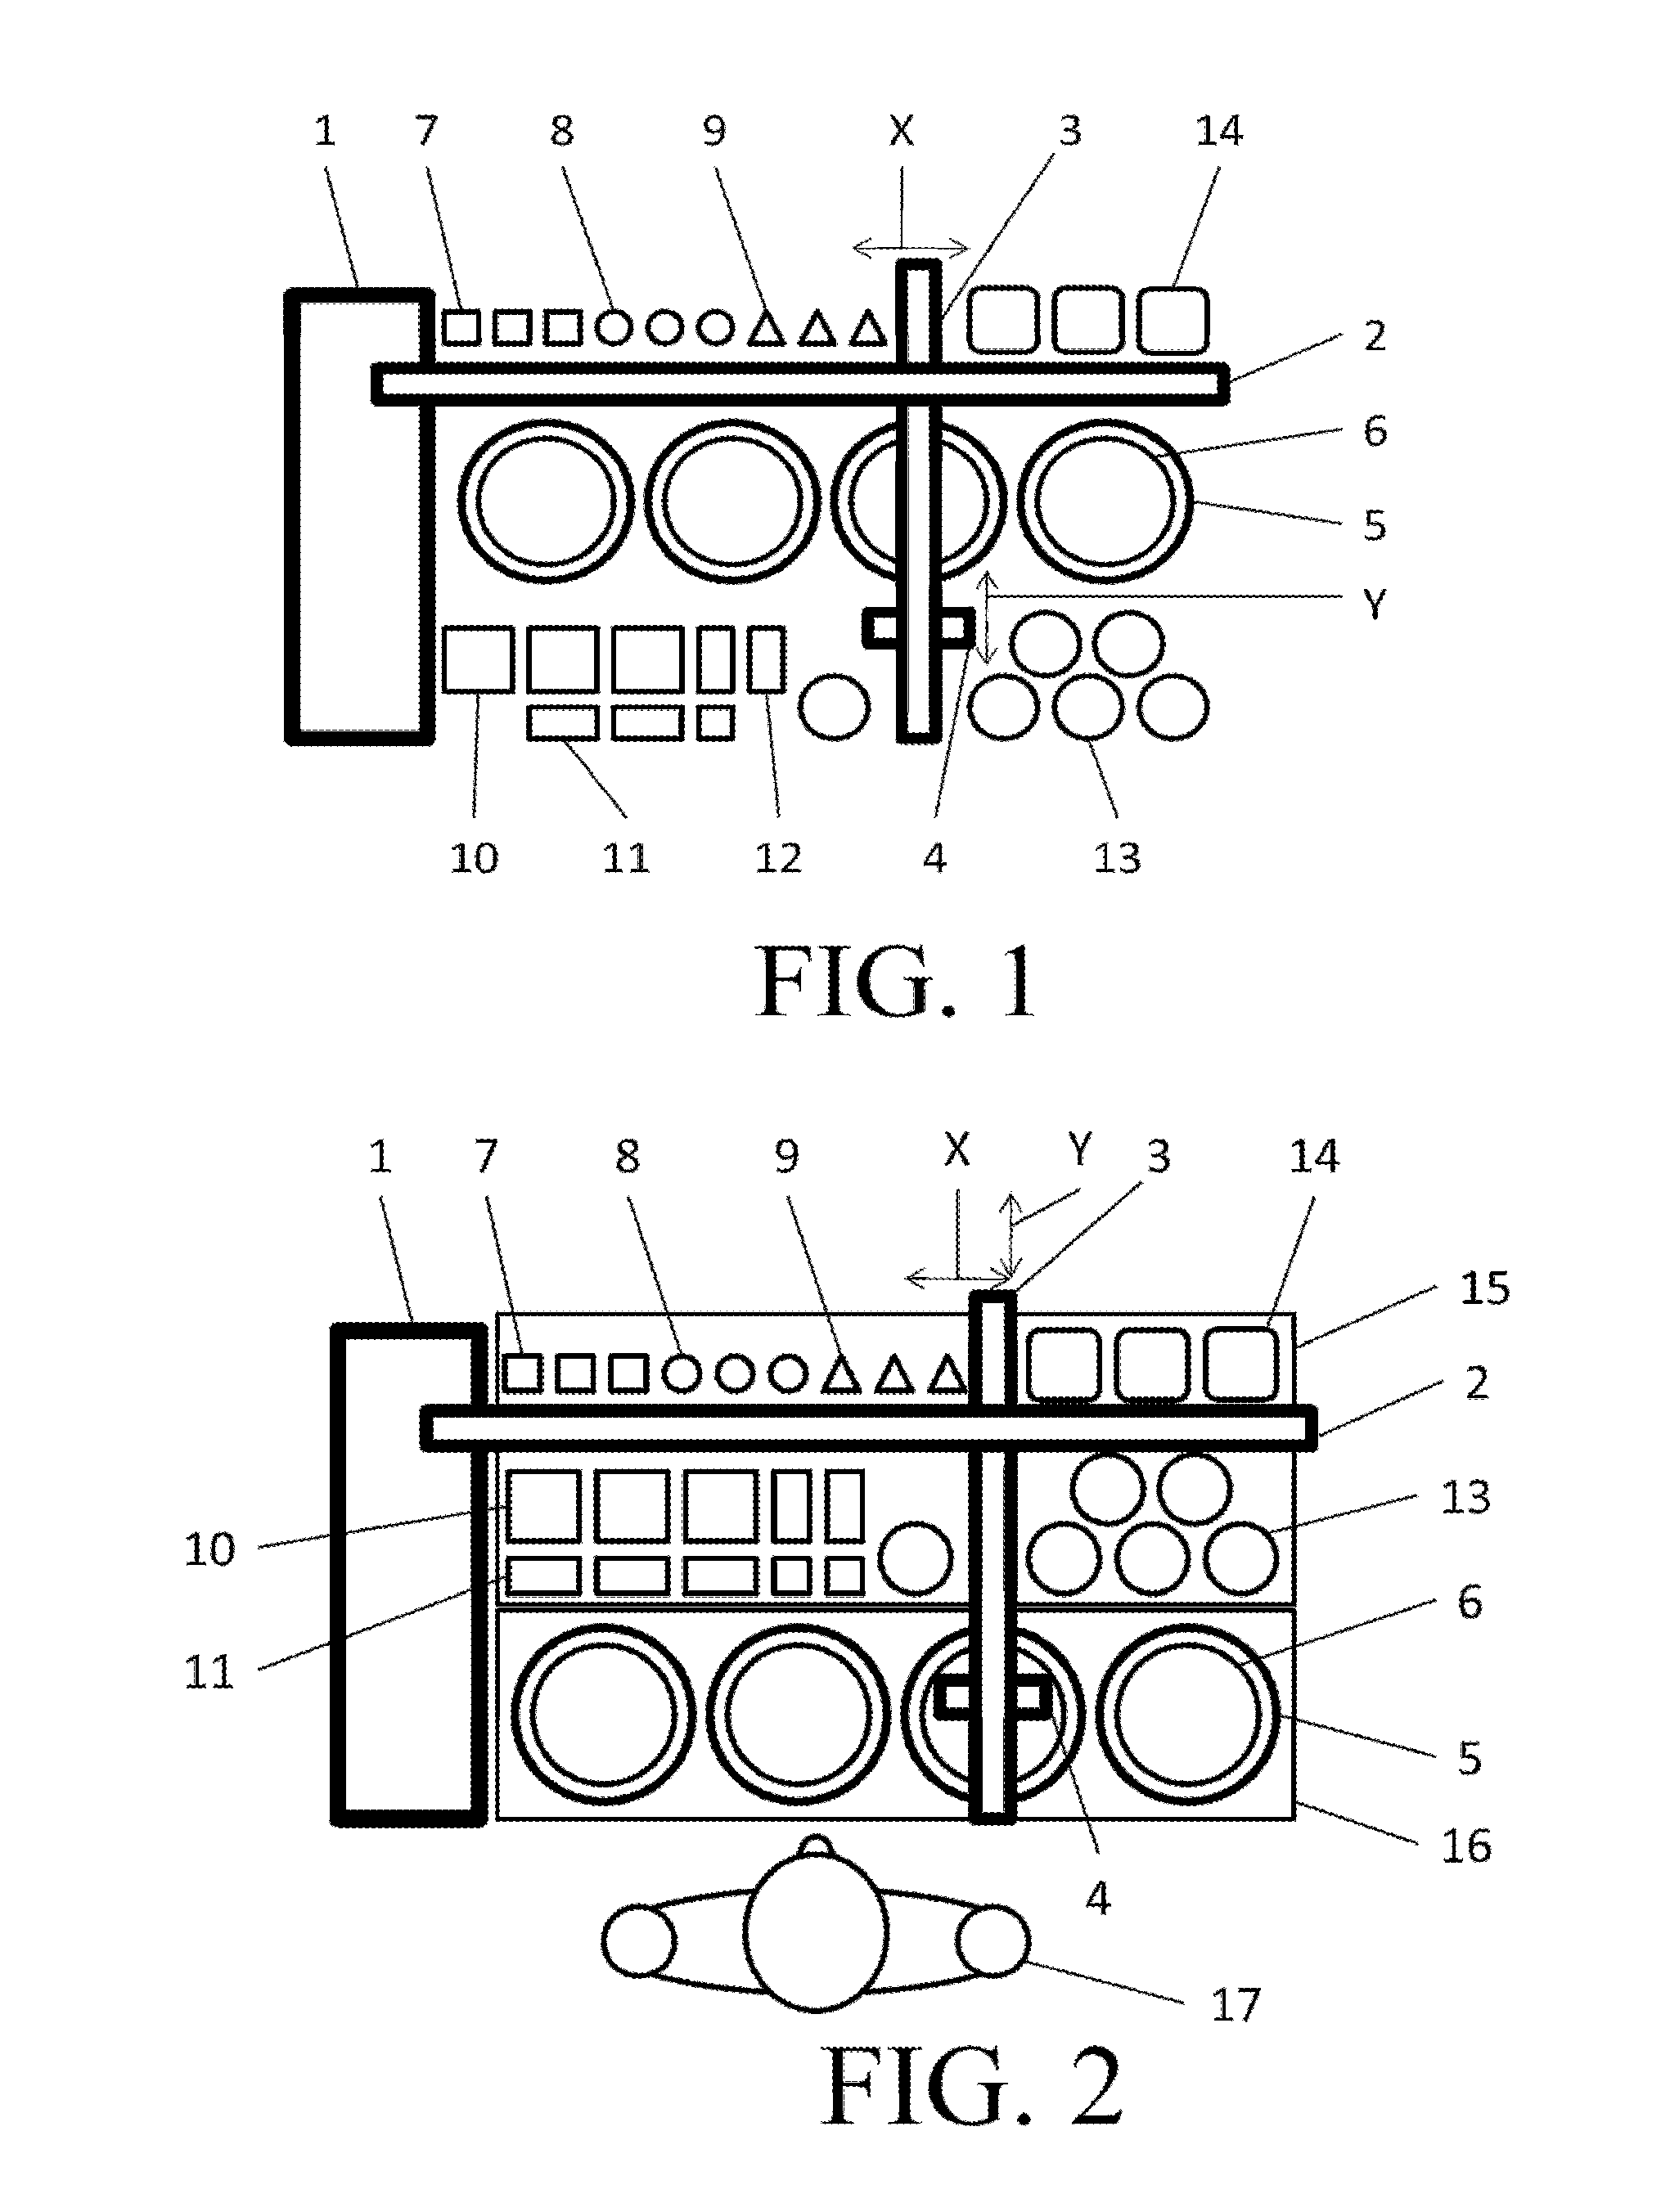 Robotic kitchen top cooking apparatus and method for preparation of dishes using computer recipies